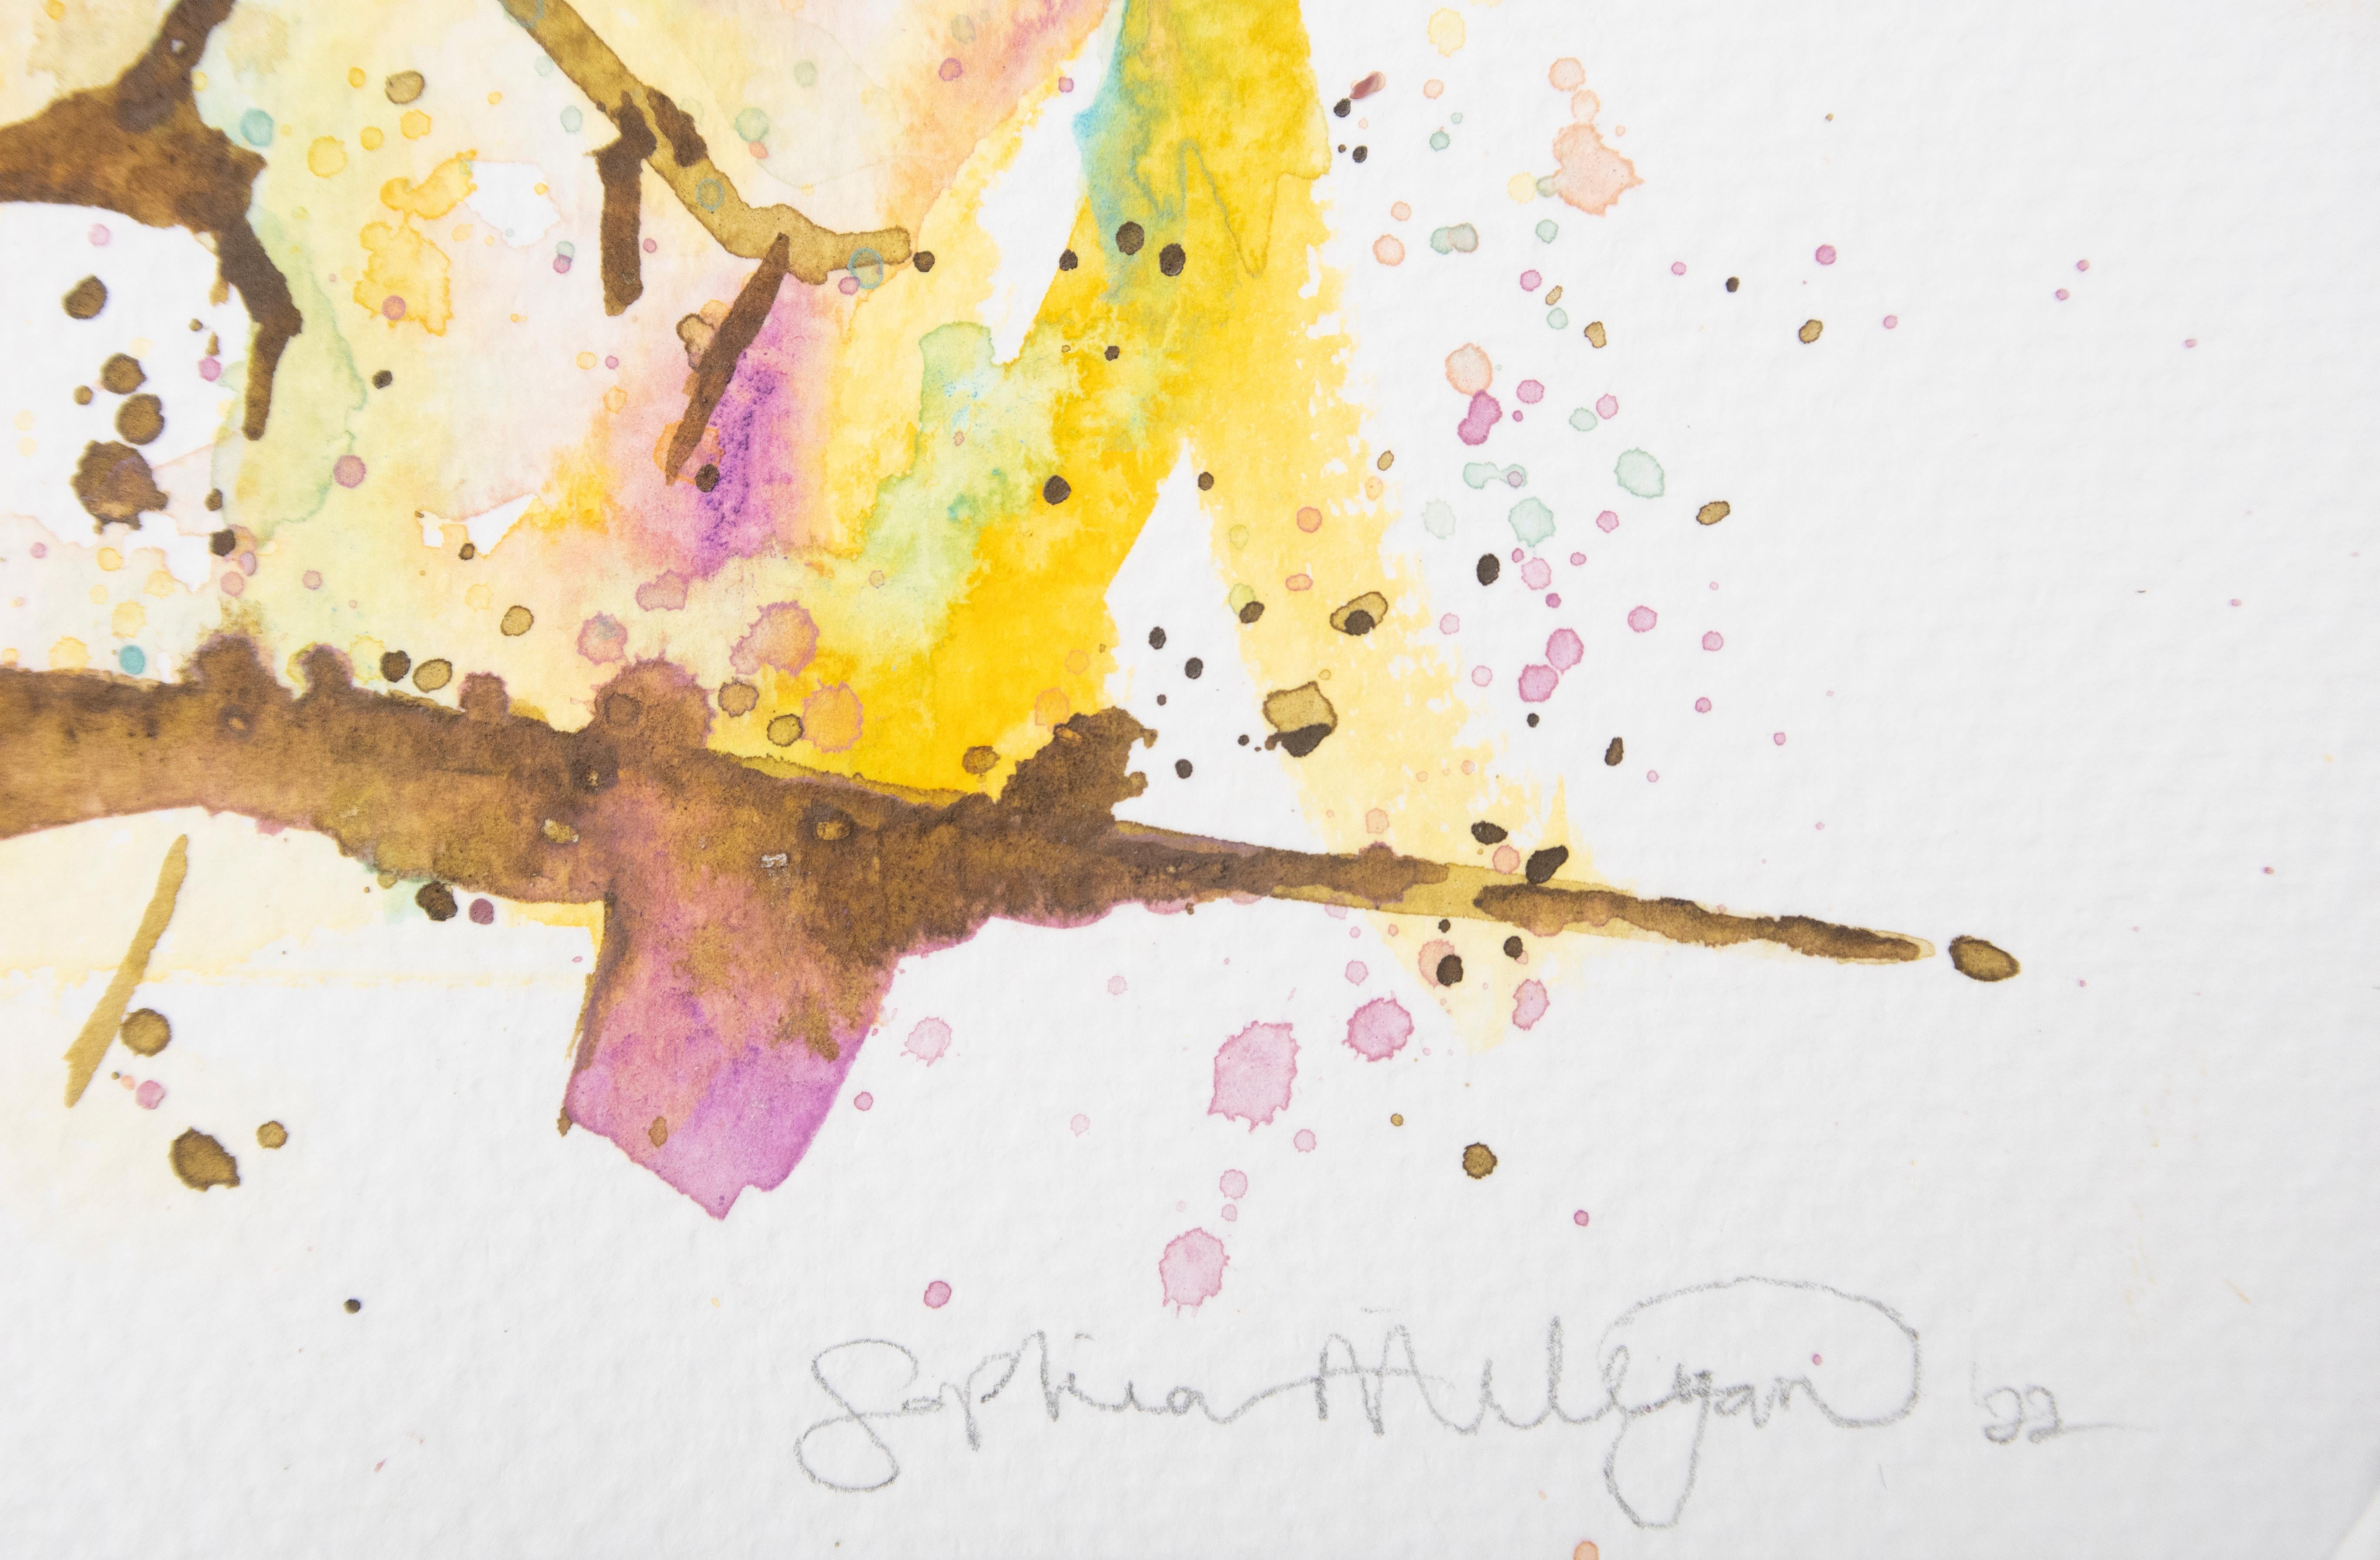 SOPHIA MILLIGAN
'Prye'
Original Artwork, Unframed
_________________

Plein air contemporary watercolour painting from the series 'Stone and Air'. 
A work in hot pastel colors reflecting the high summer heat on the sculptural forms of the ancient